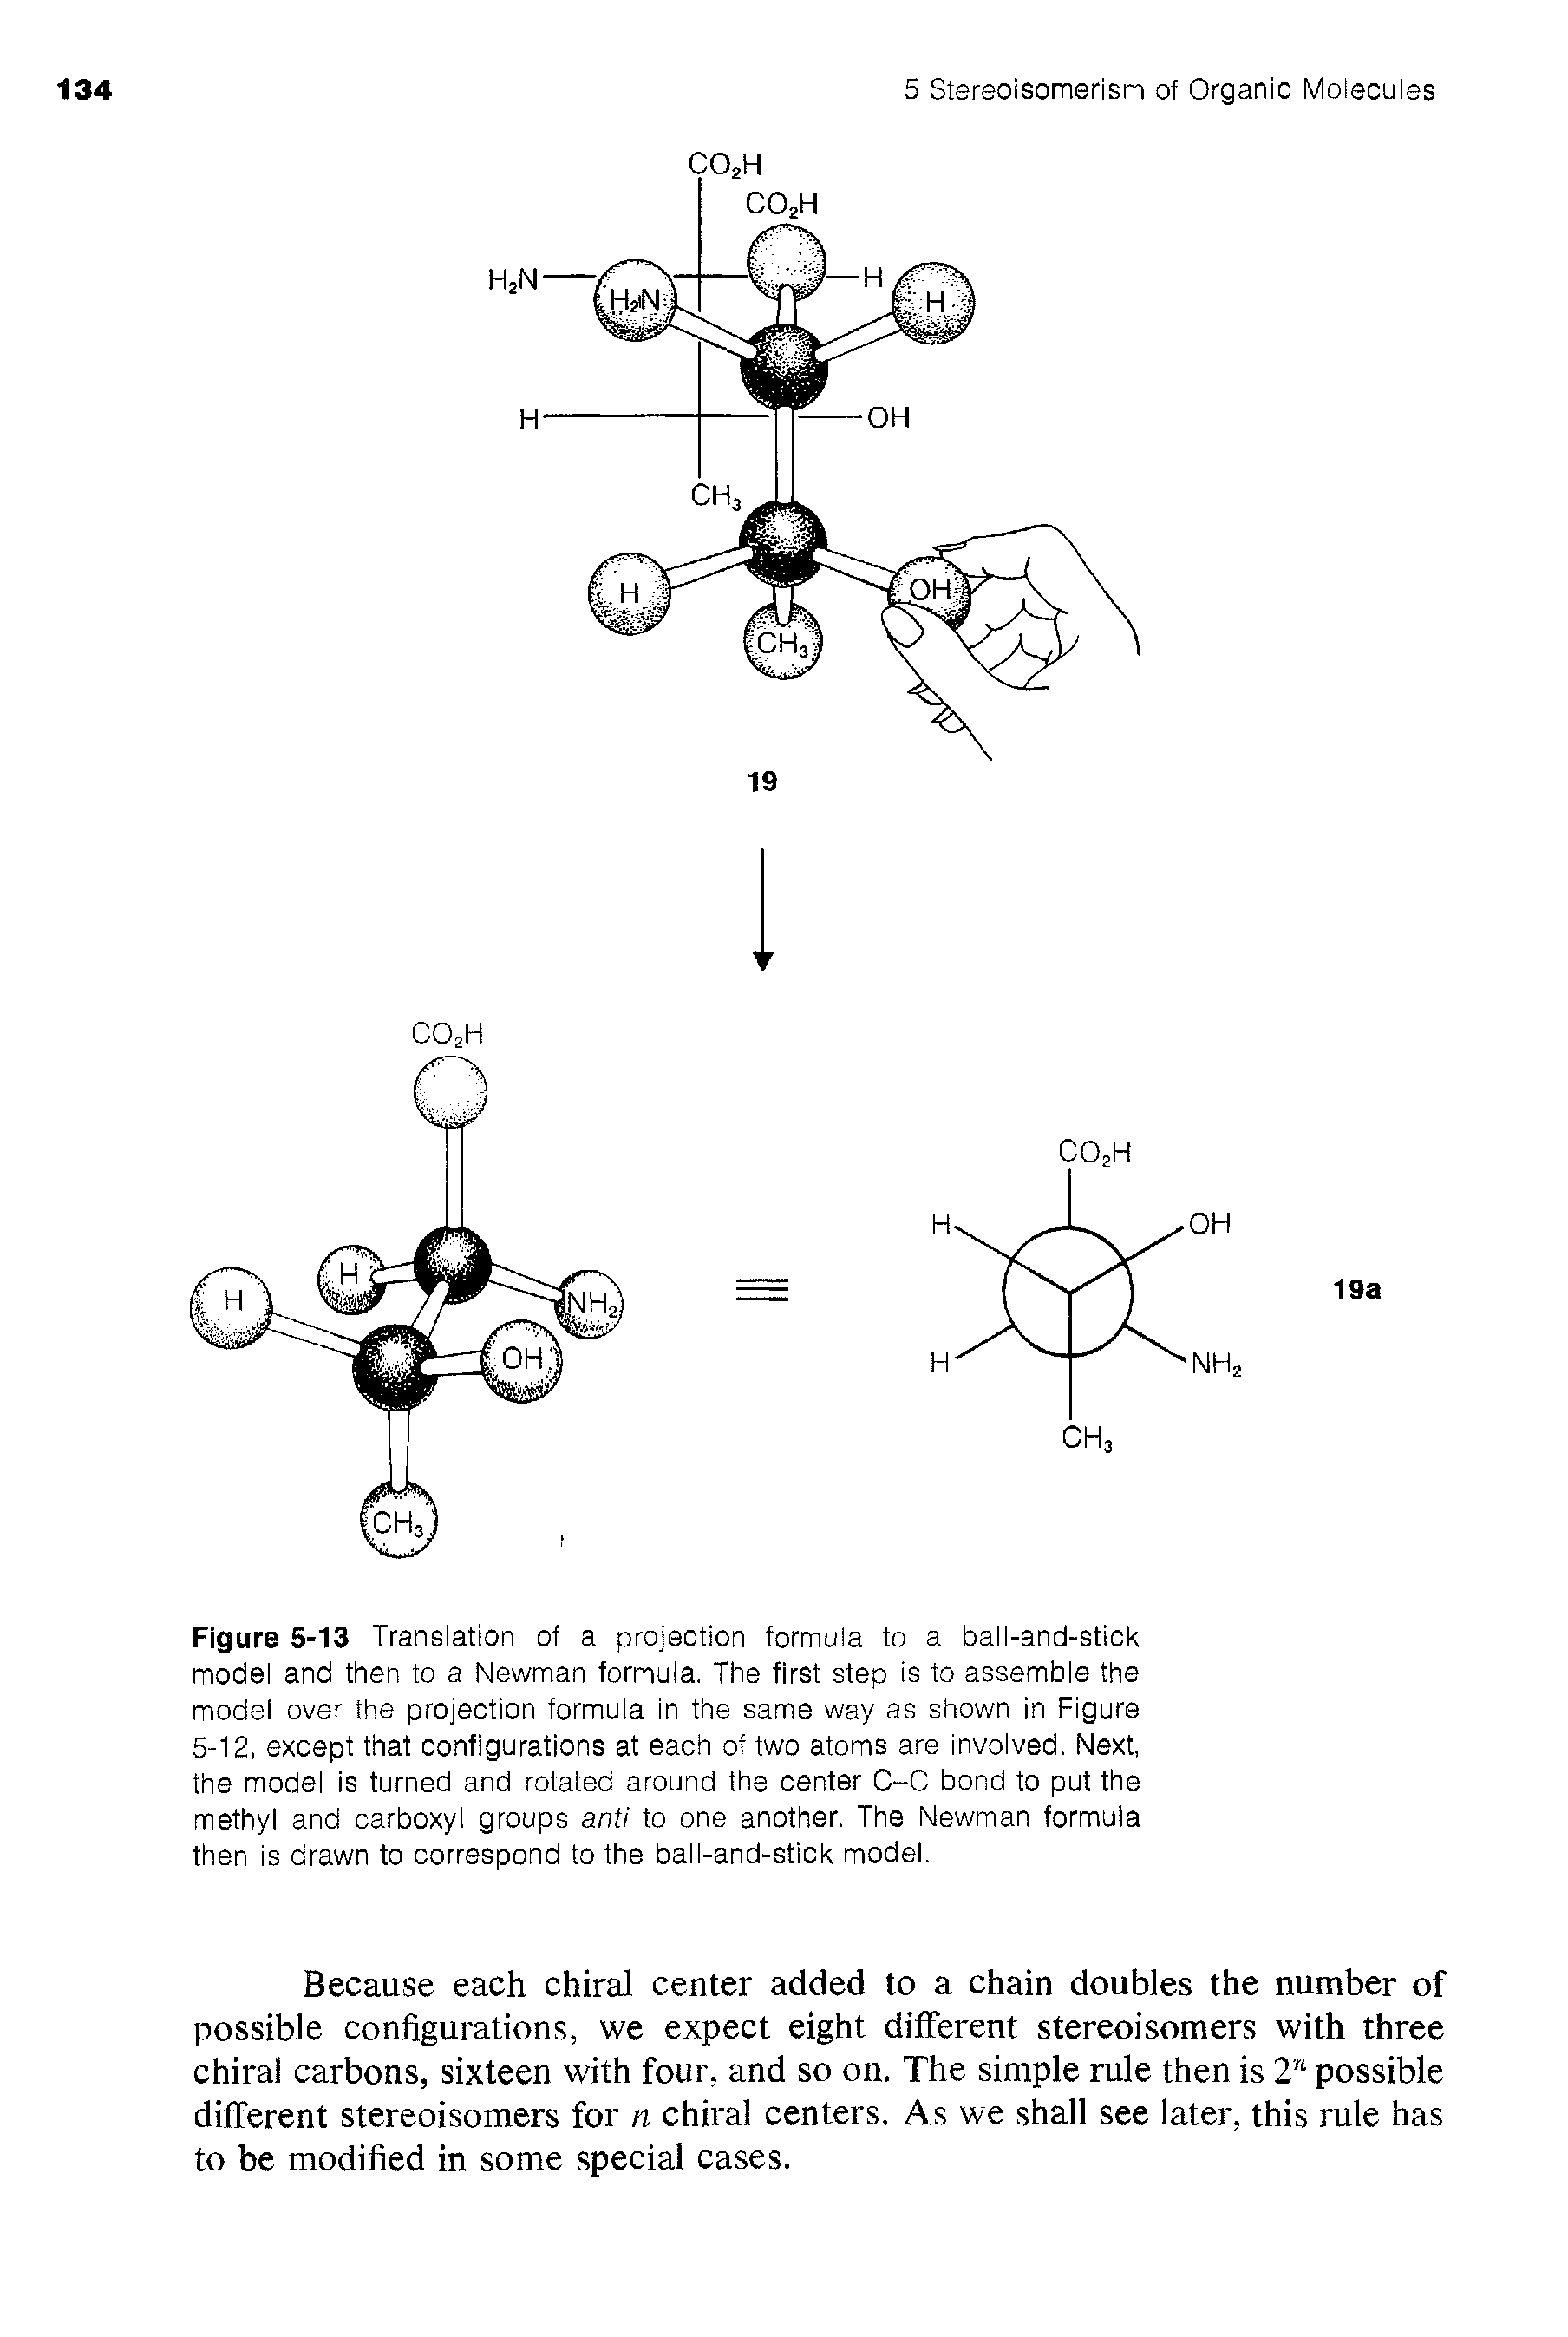 Figure 5-13 Translation of a projection formula to a ball-and-stick model and then to a Newman formula. The first step is to assemble the model over the projection formula in the same way as shown in Figure 5-12, except that configurations at each of two atoms are involved. Next, the model is turned and rotated around the center C-C bond to put the methyl and carboxyl groups anti to one another. The Newman formula then is drawn to correspond to the ball-and-stick model.